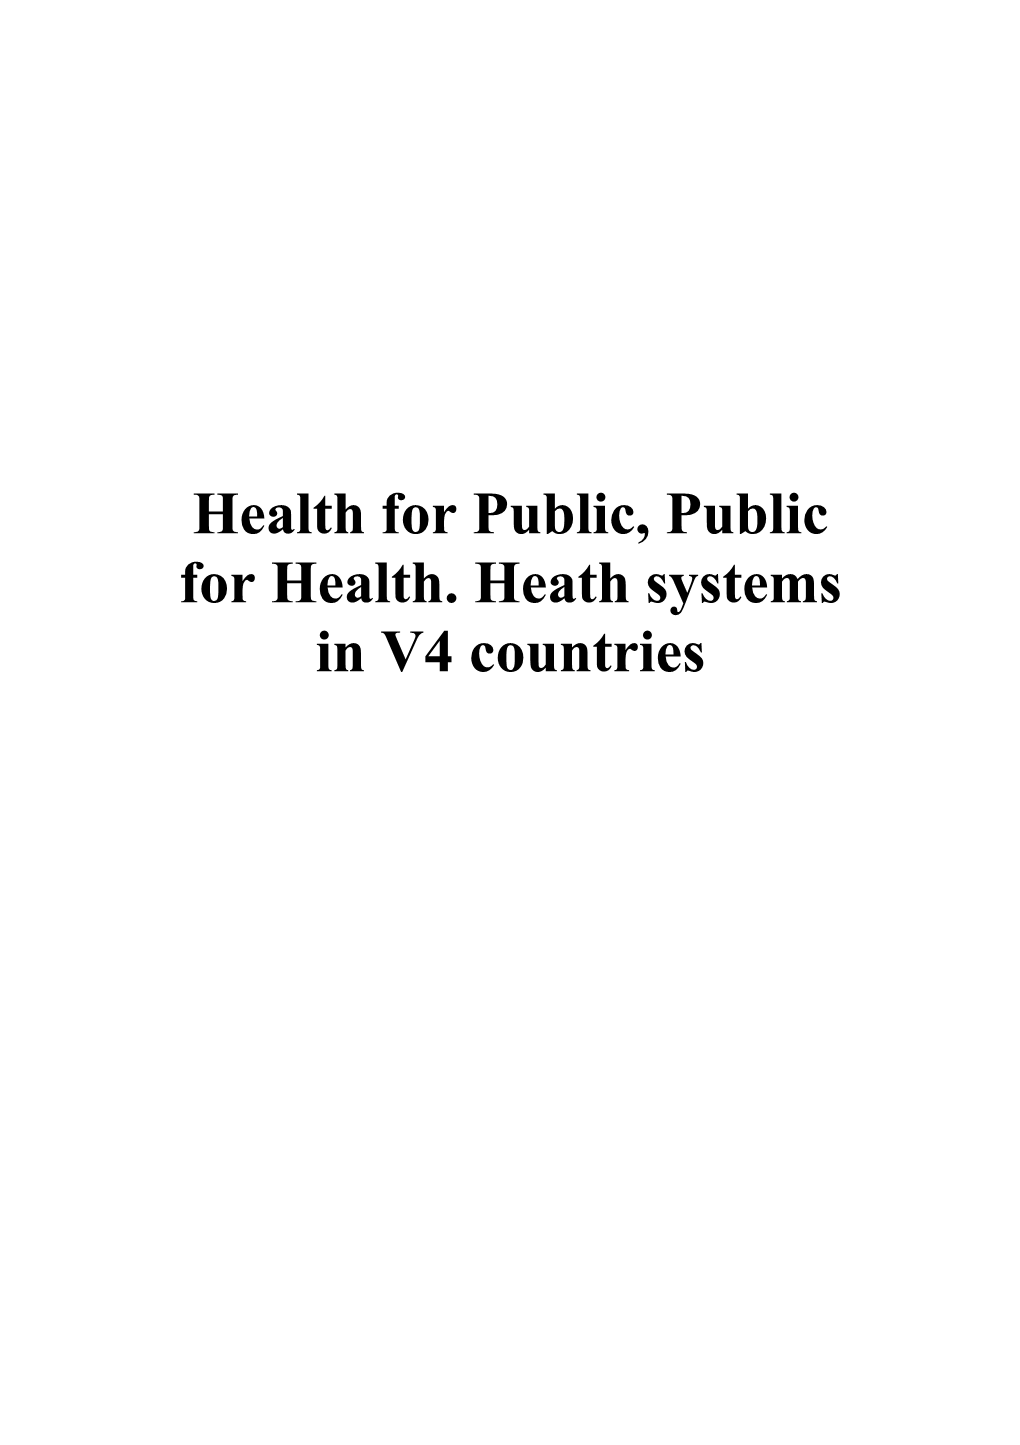 Health for Public, Public for Health. Heath Systems in V4 Countries